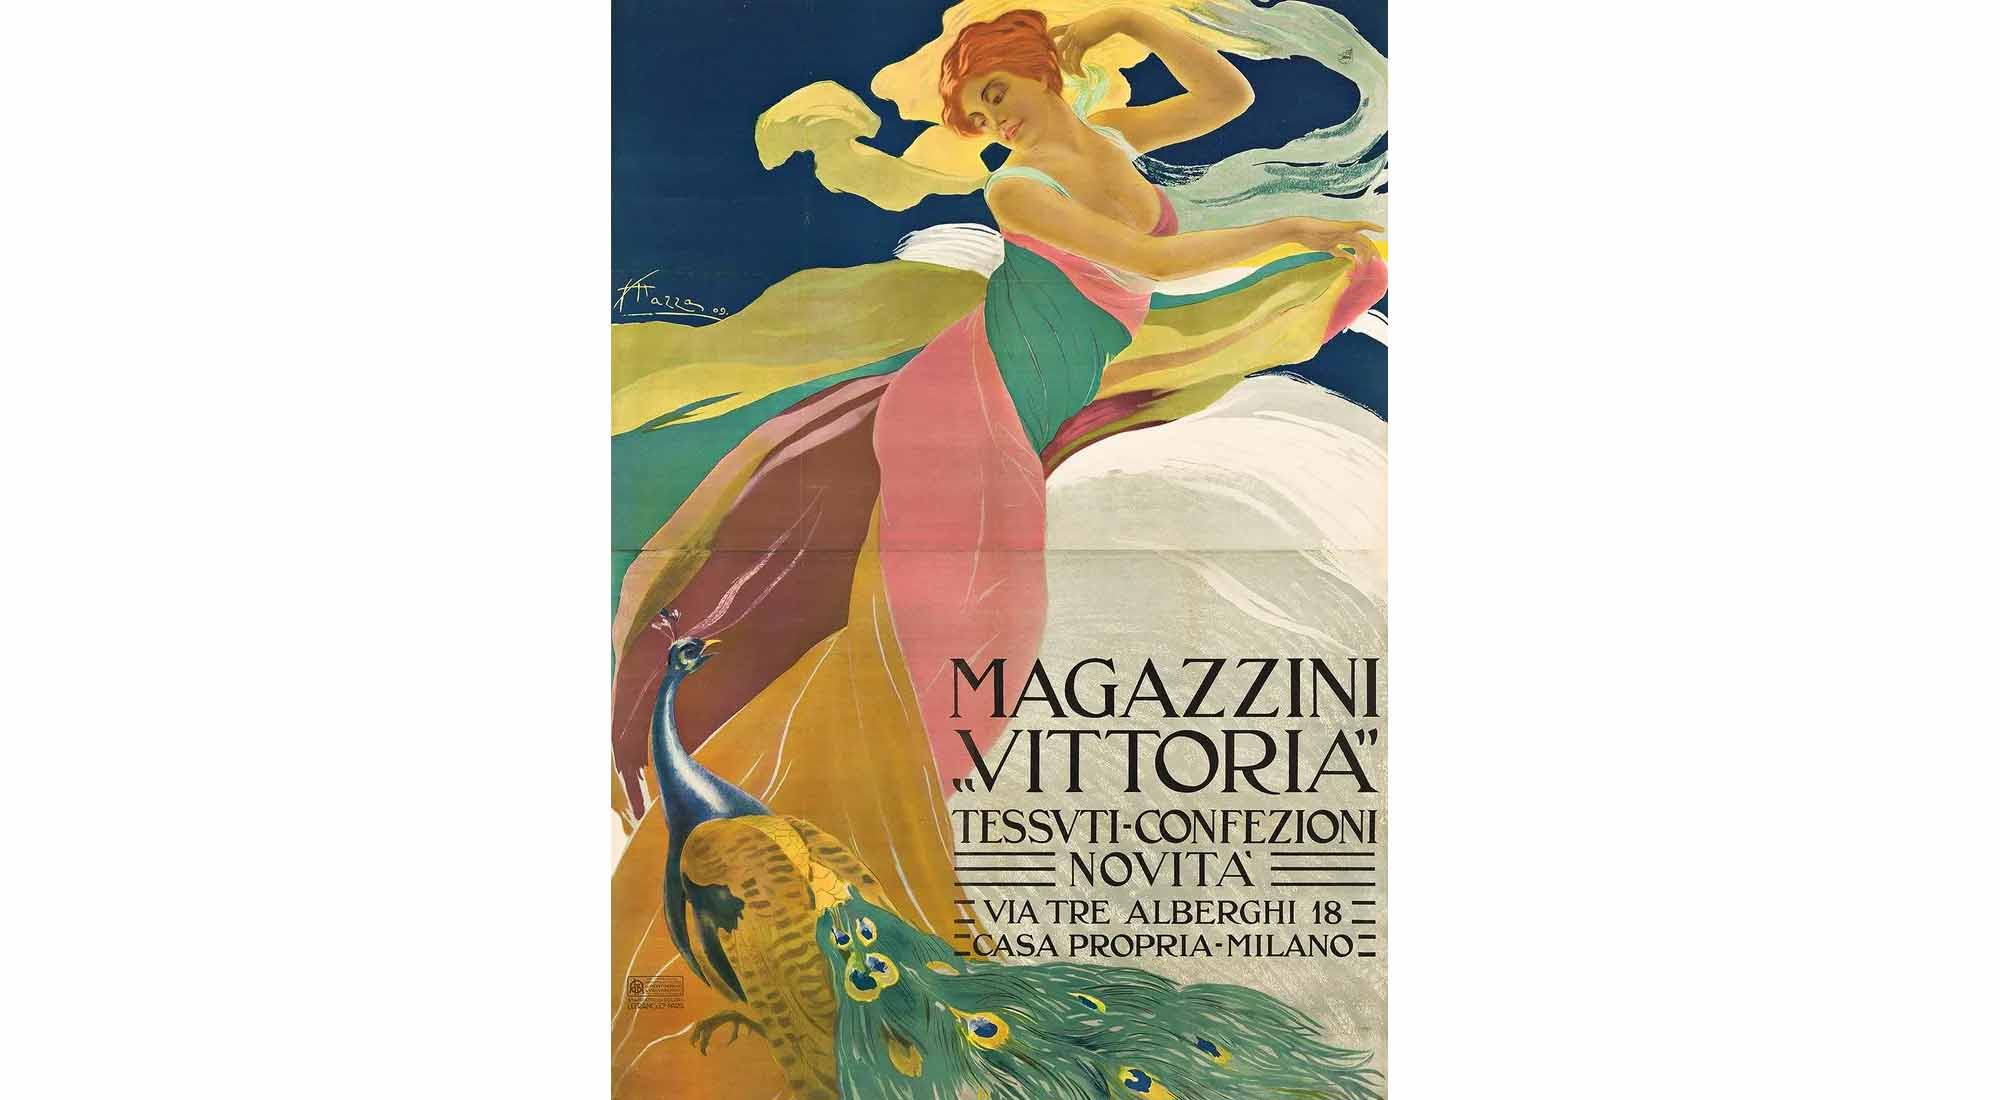 Leopoldo Metlicovitz’s poster Alla Spezia created in 1907 to mark the launch of the battleship Roma sold for $15,600 at Swann Auction Galleries.